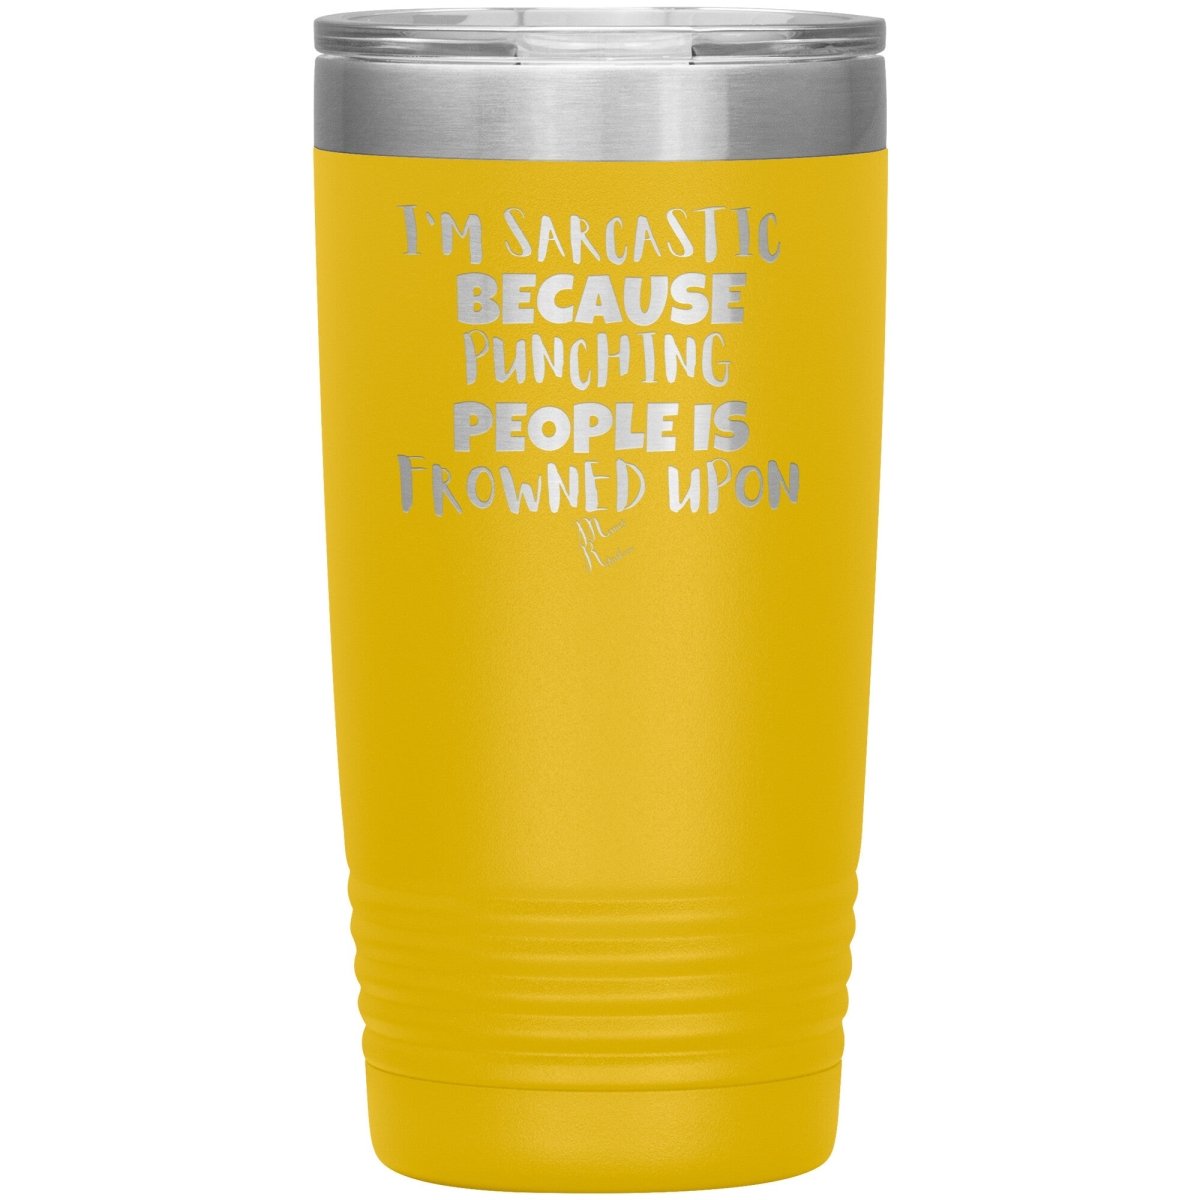 I'm Sarcastic Because Punching People is Frowned Upon Tumblers, 20oz Insulated Tumbler / Yellow - MemesRetail.com